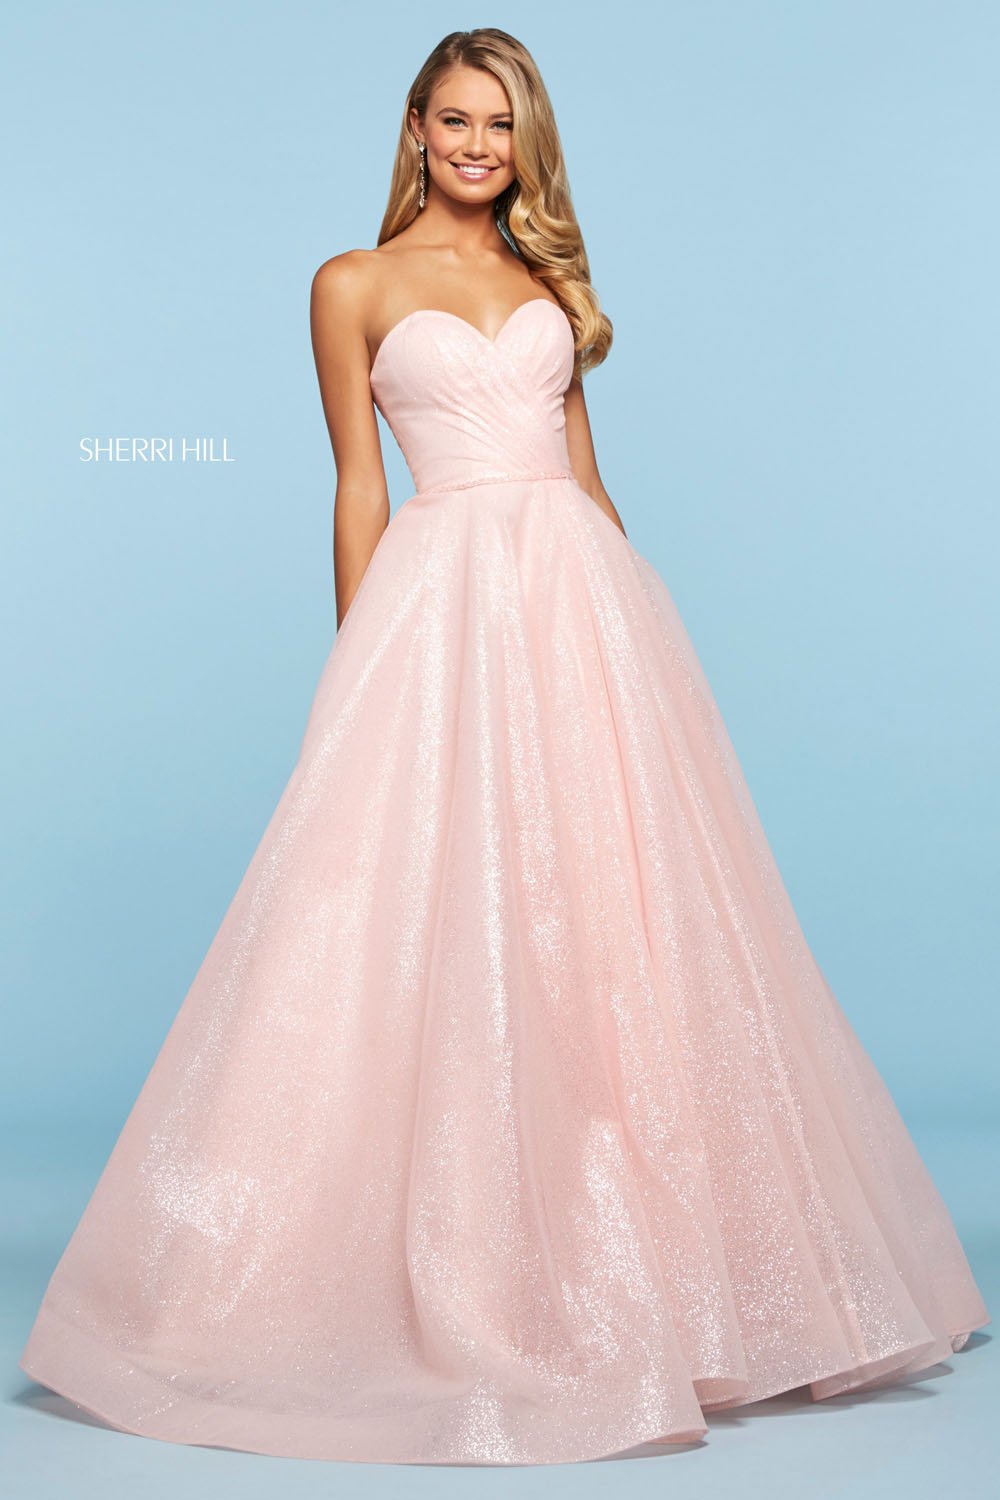 Sherri Hill 53419 dress images in these colors: Candy Pink, Ivory, Yellow, Light Pink.